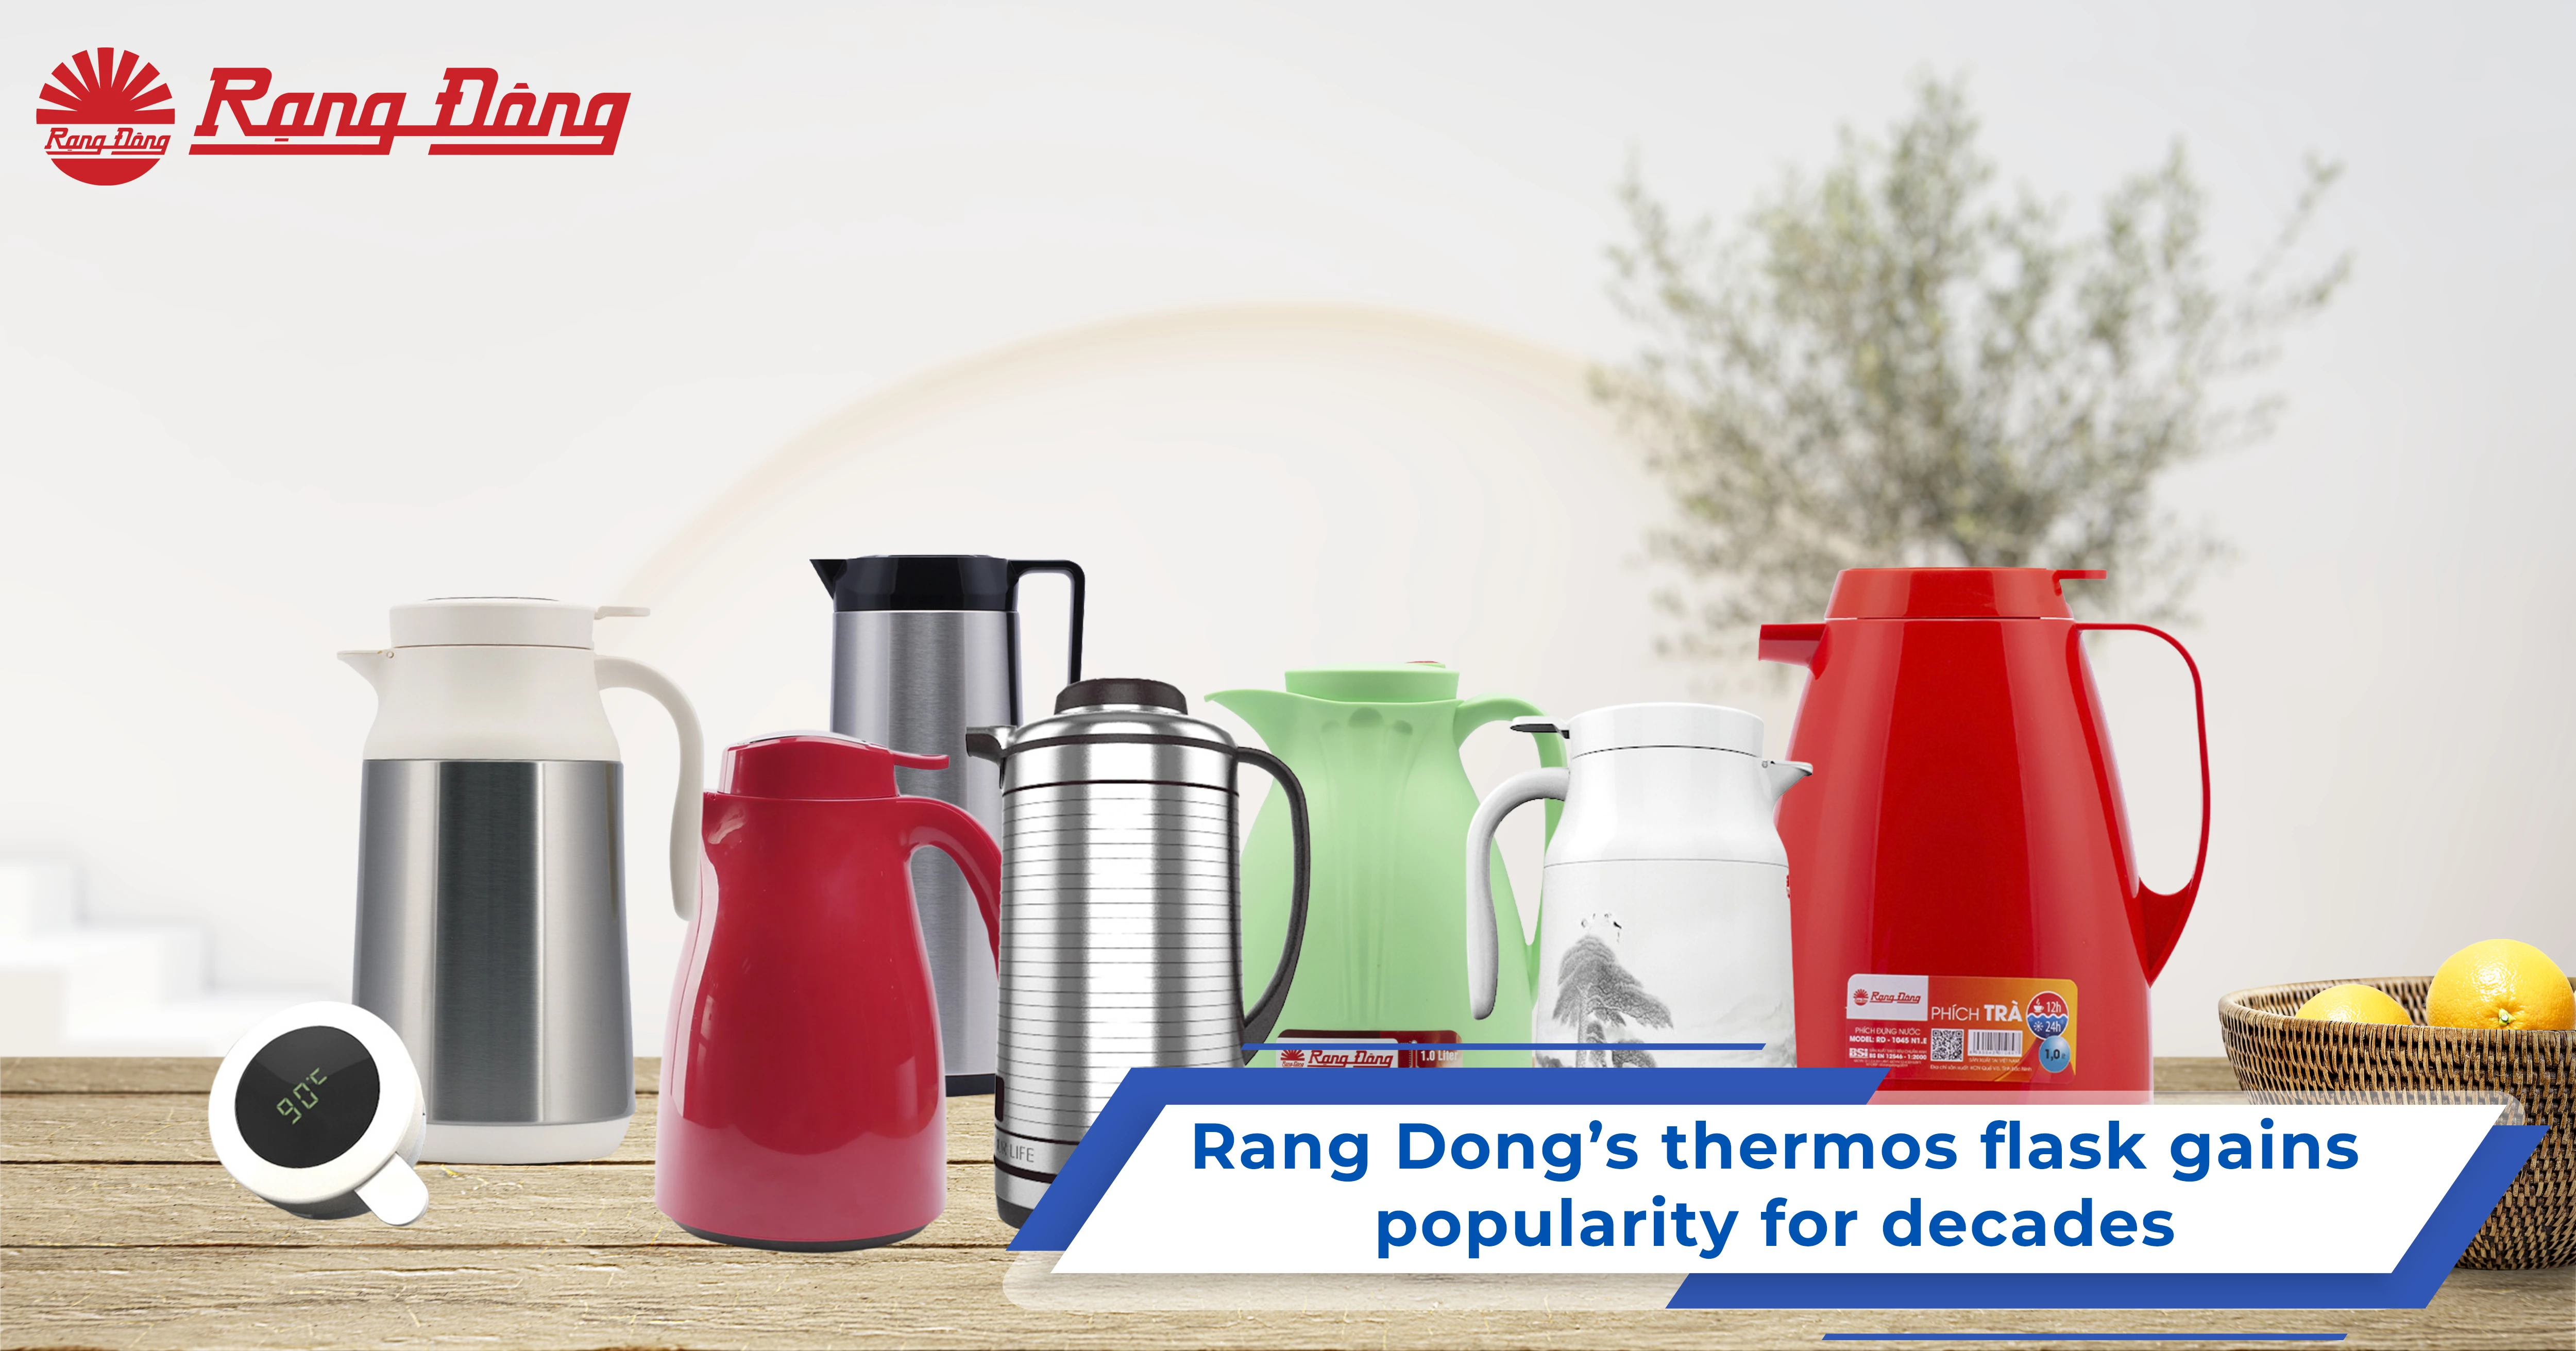 Rang Dong’s thermos flask gains popularity for decades